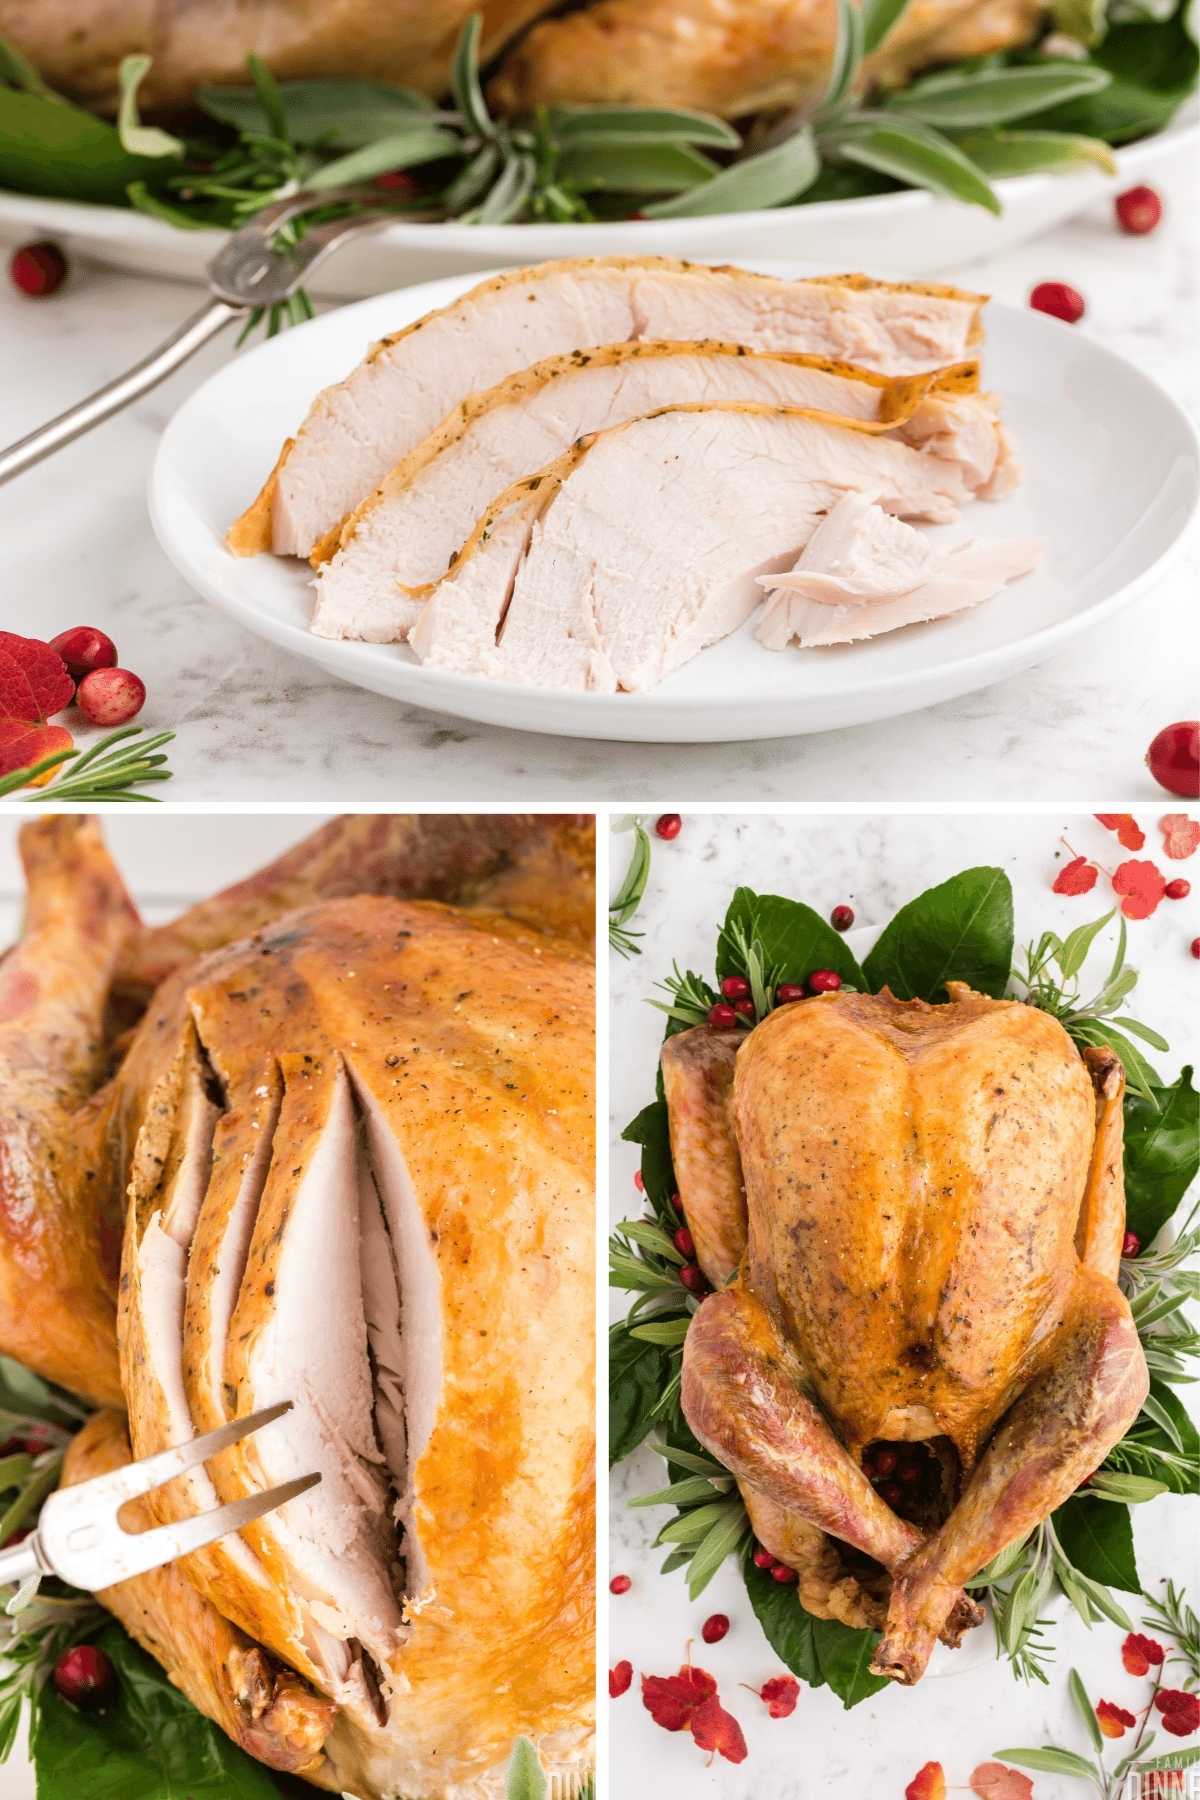 collage. top image of turkey slices on a white round plate with turkey in the background. Next image of closeup of slices into the turkey breast with two prong fork holding it open. Third image of full golden roasted turkey on bed of greens.